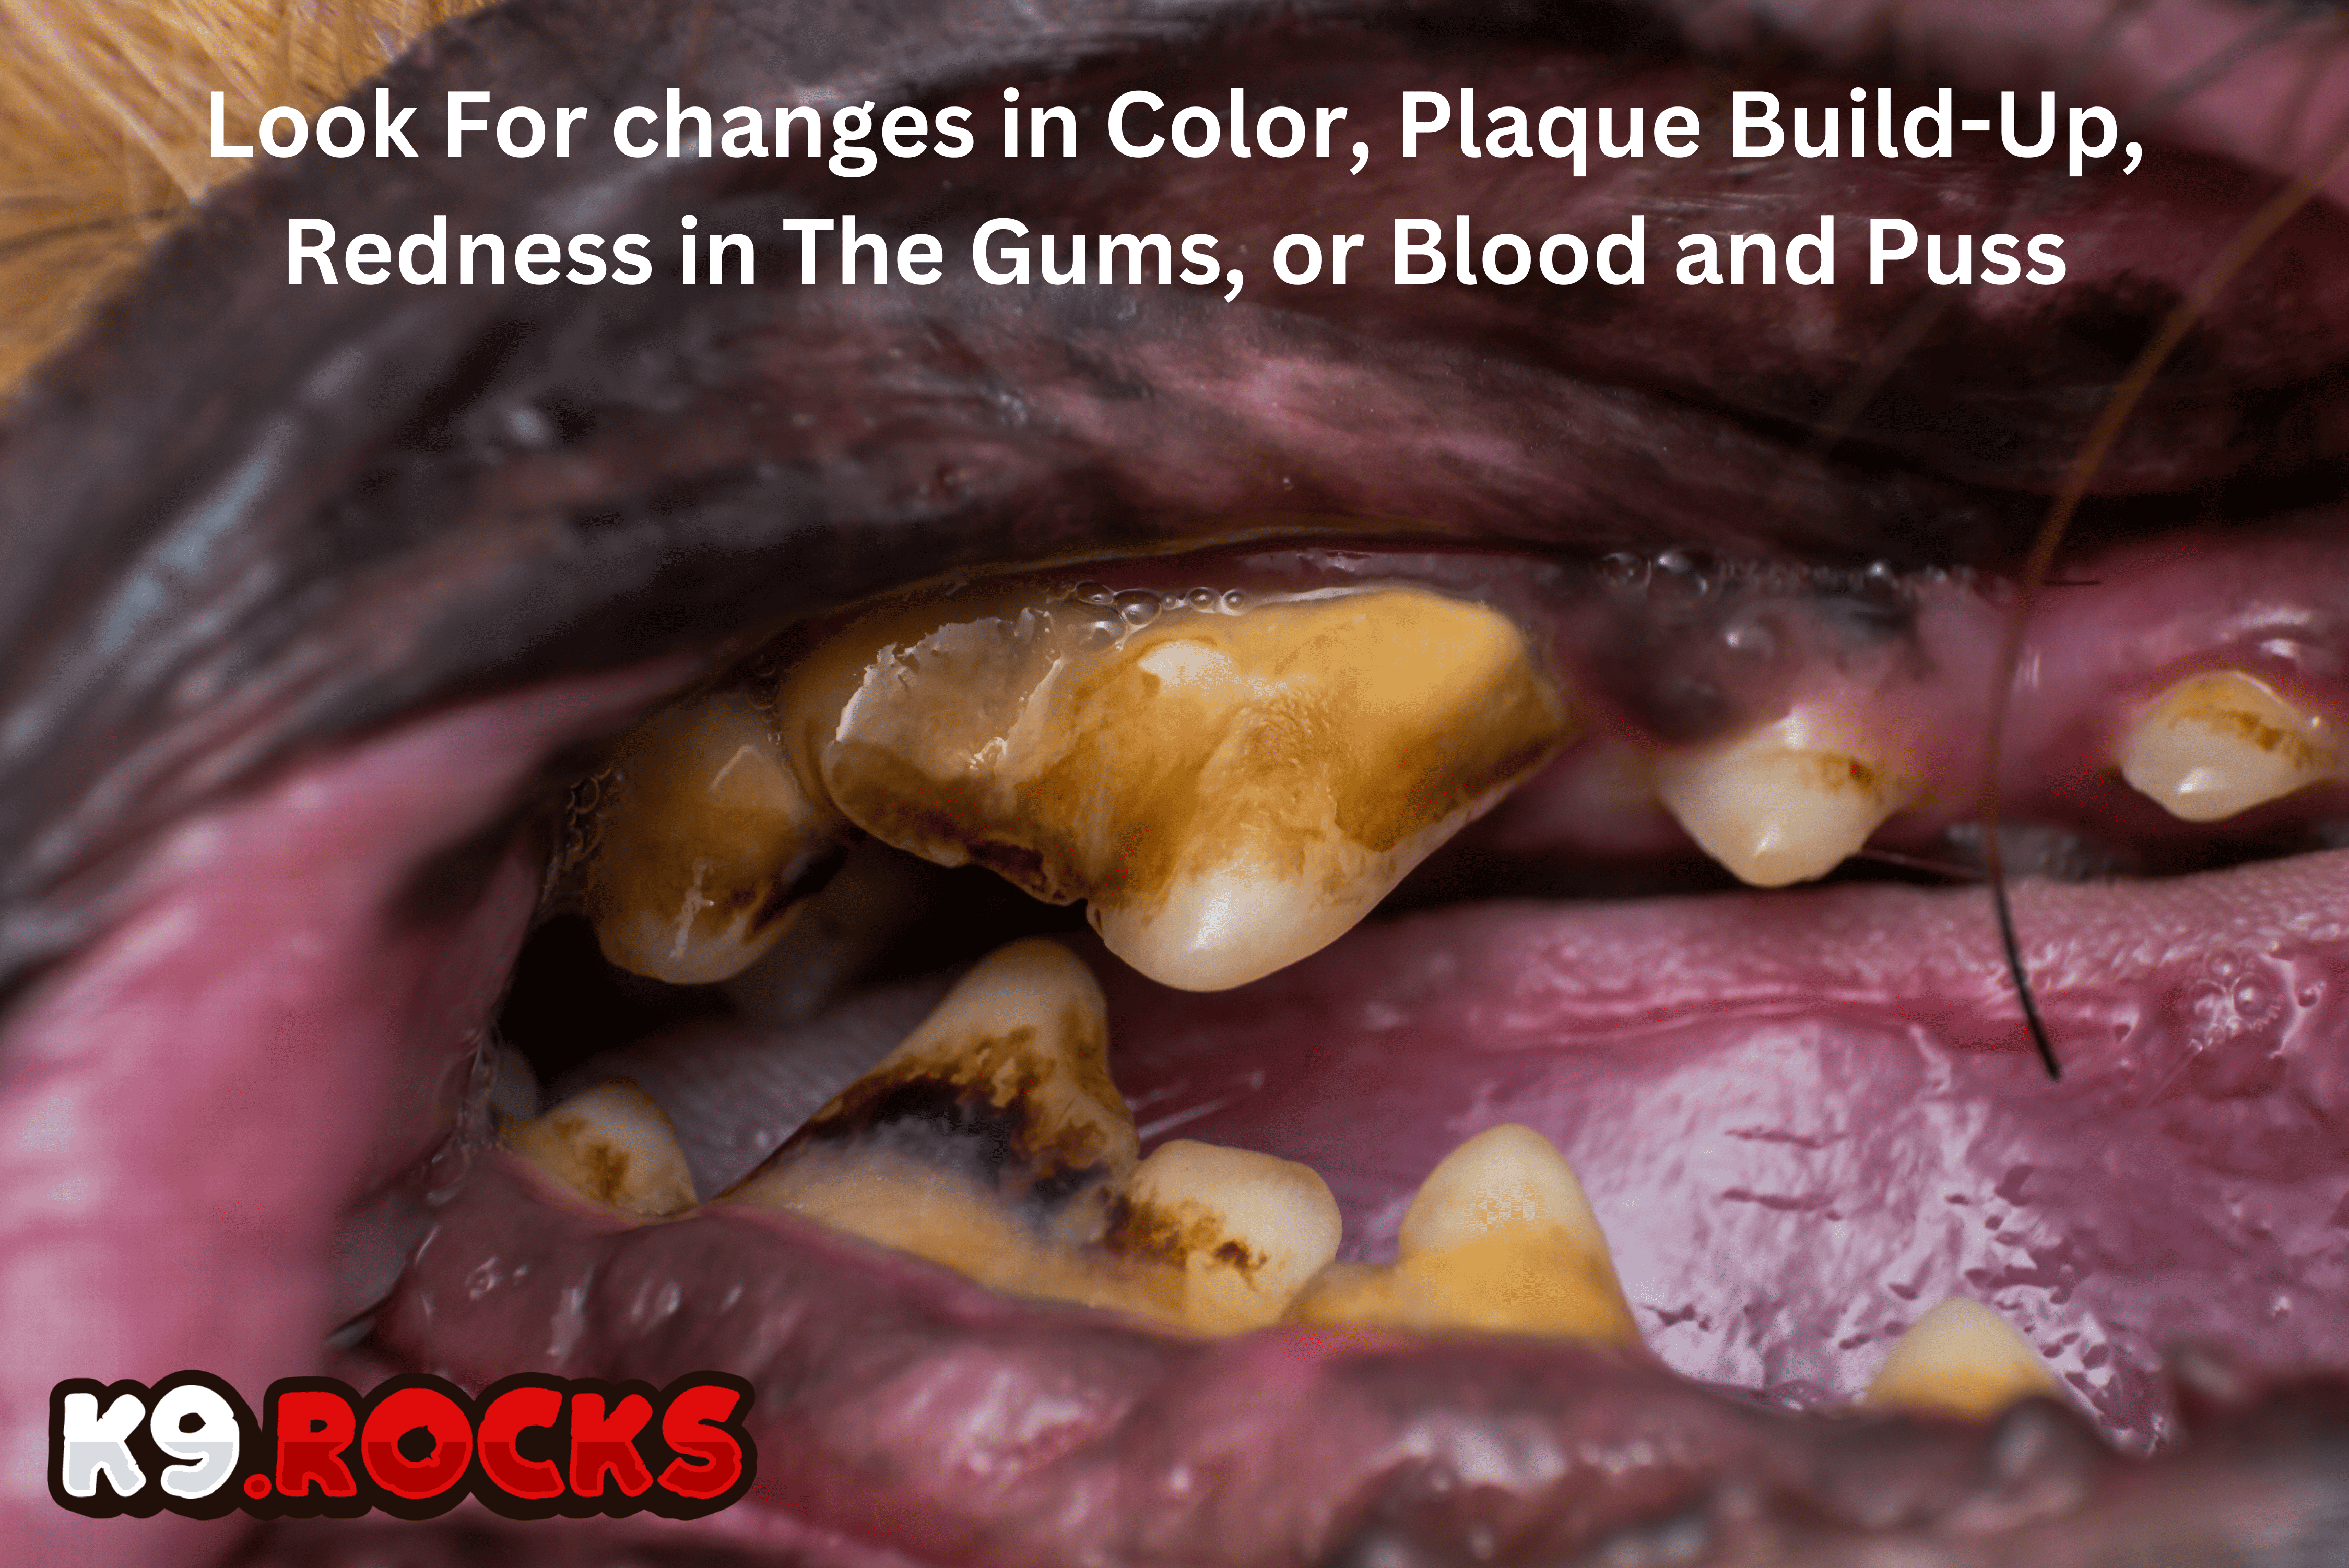 A close up of a dog's mouth with bacterial plaque or tartar and missing teeth